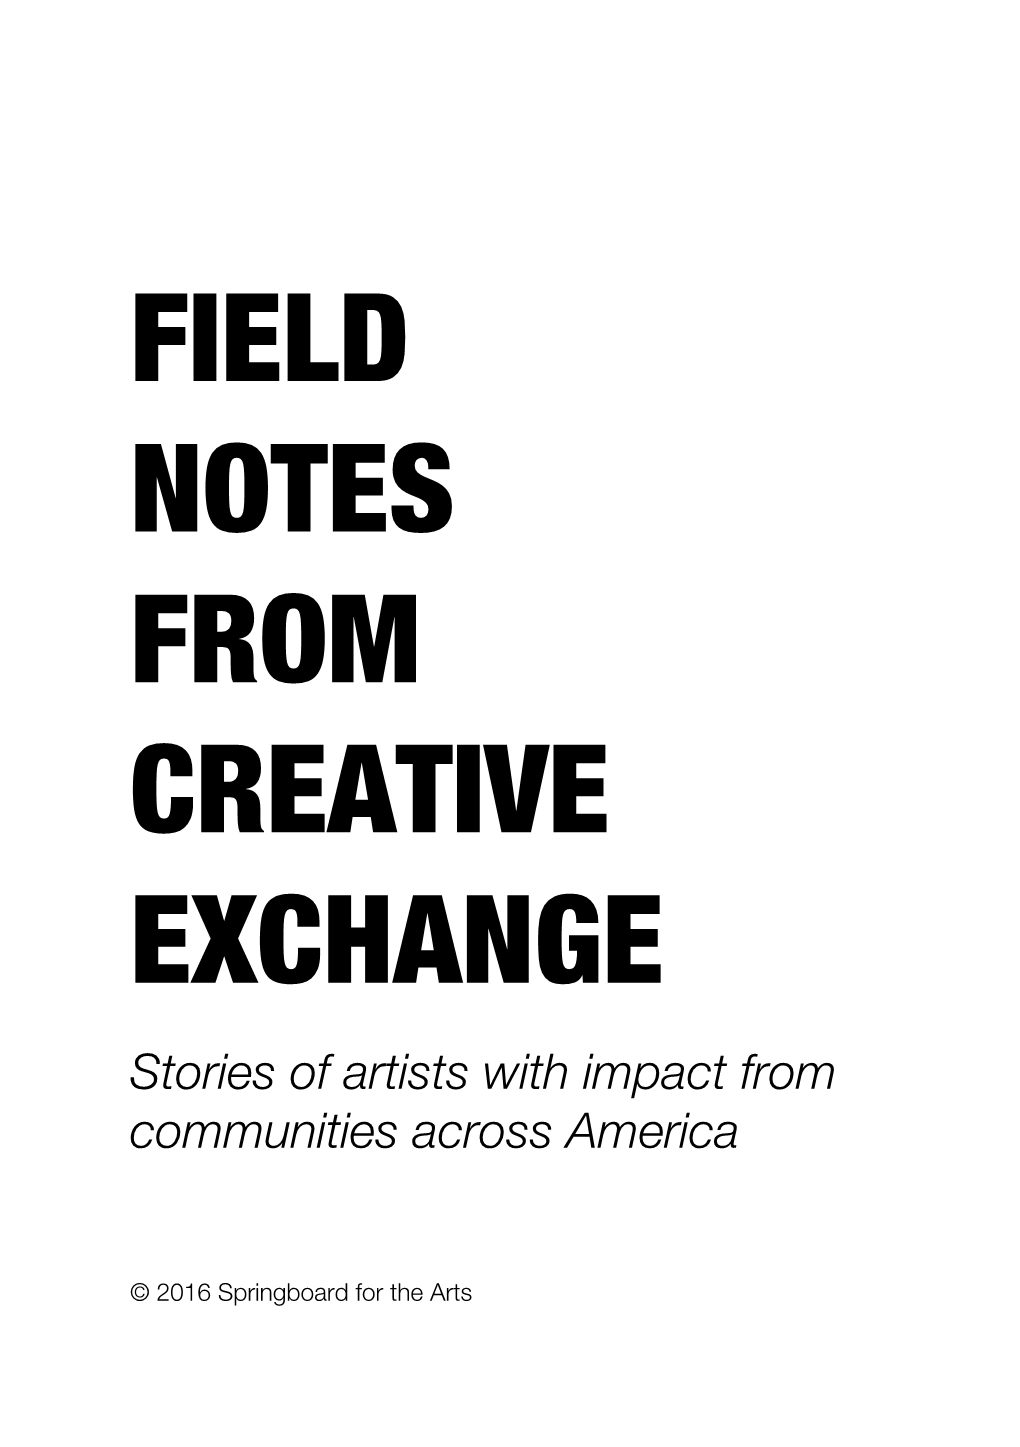 Field Notes from Creative Exchange